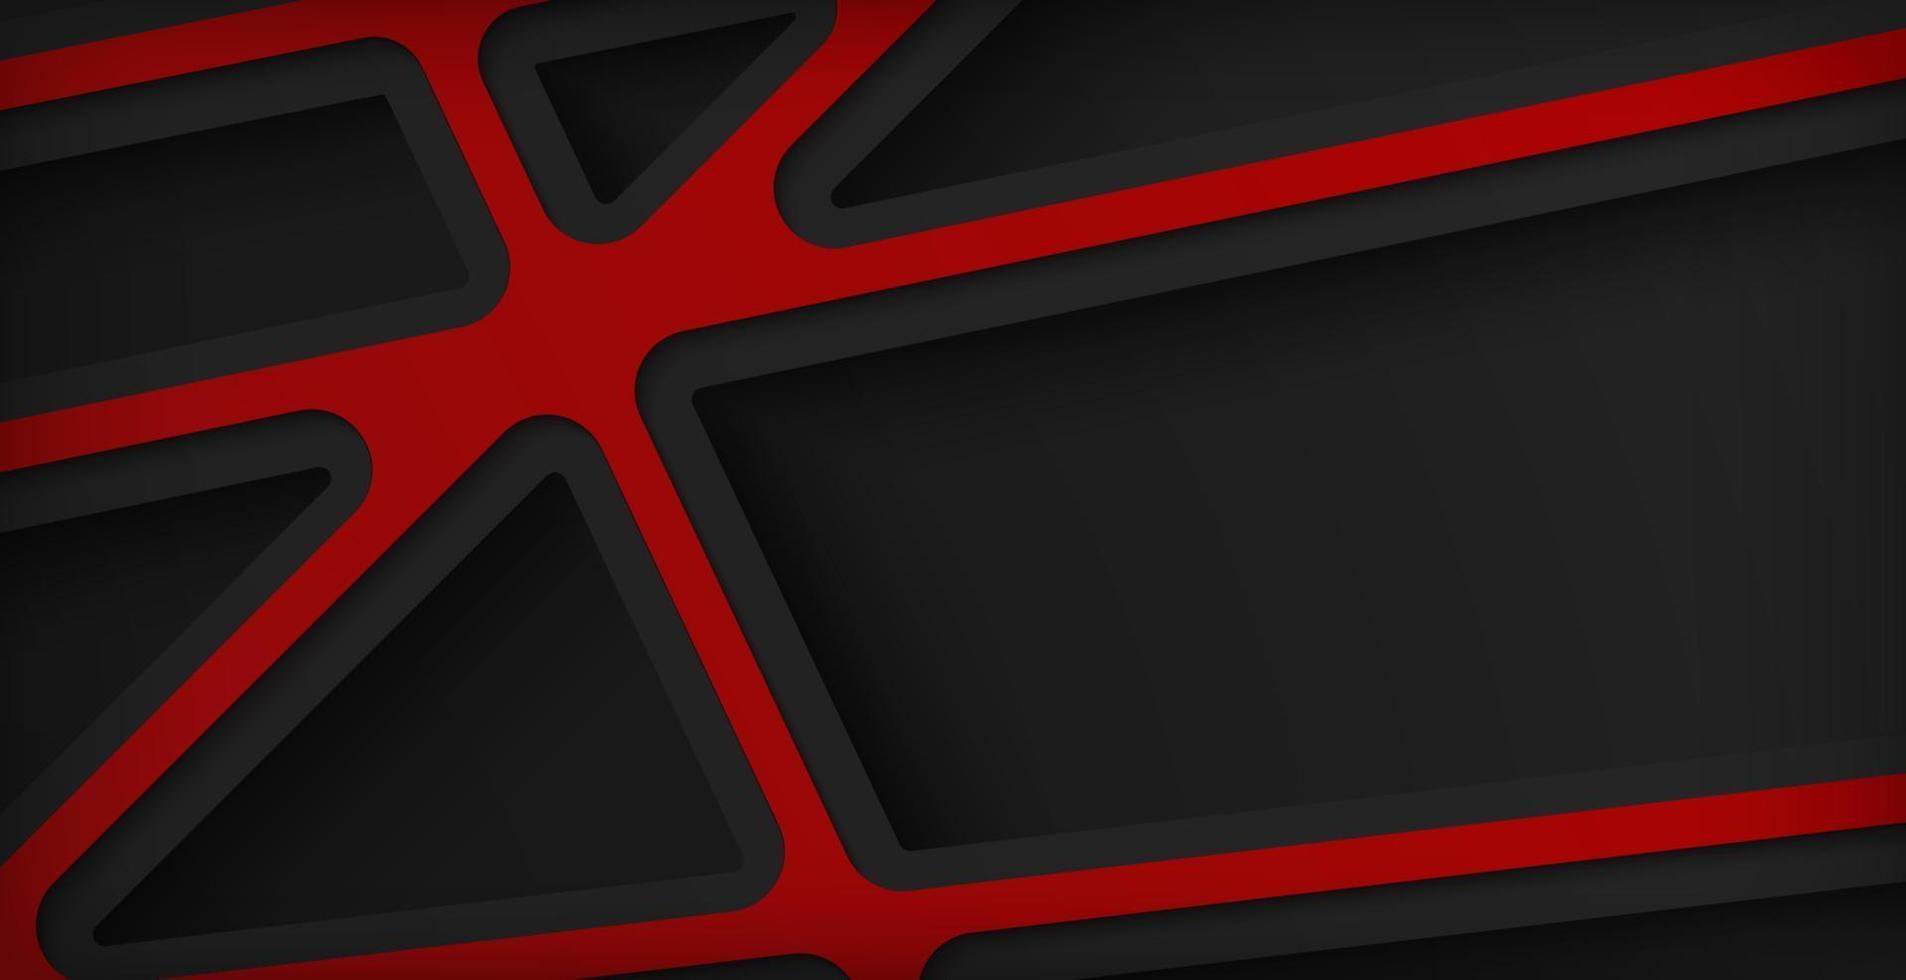 black and red background with crossing line, solid line background concept. vector